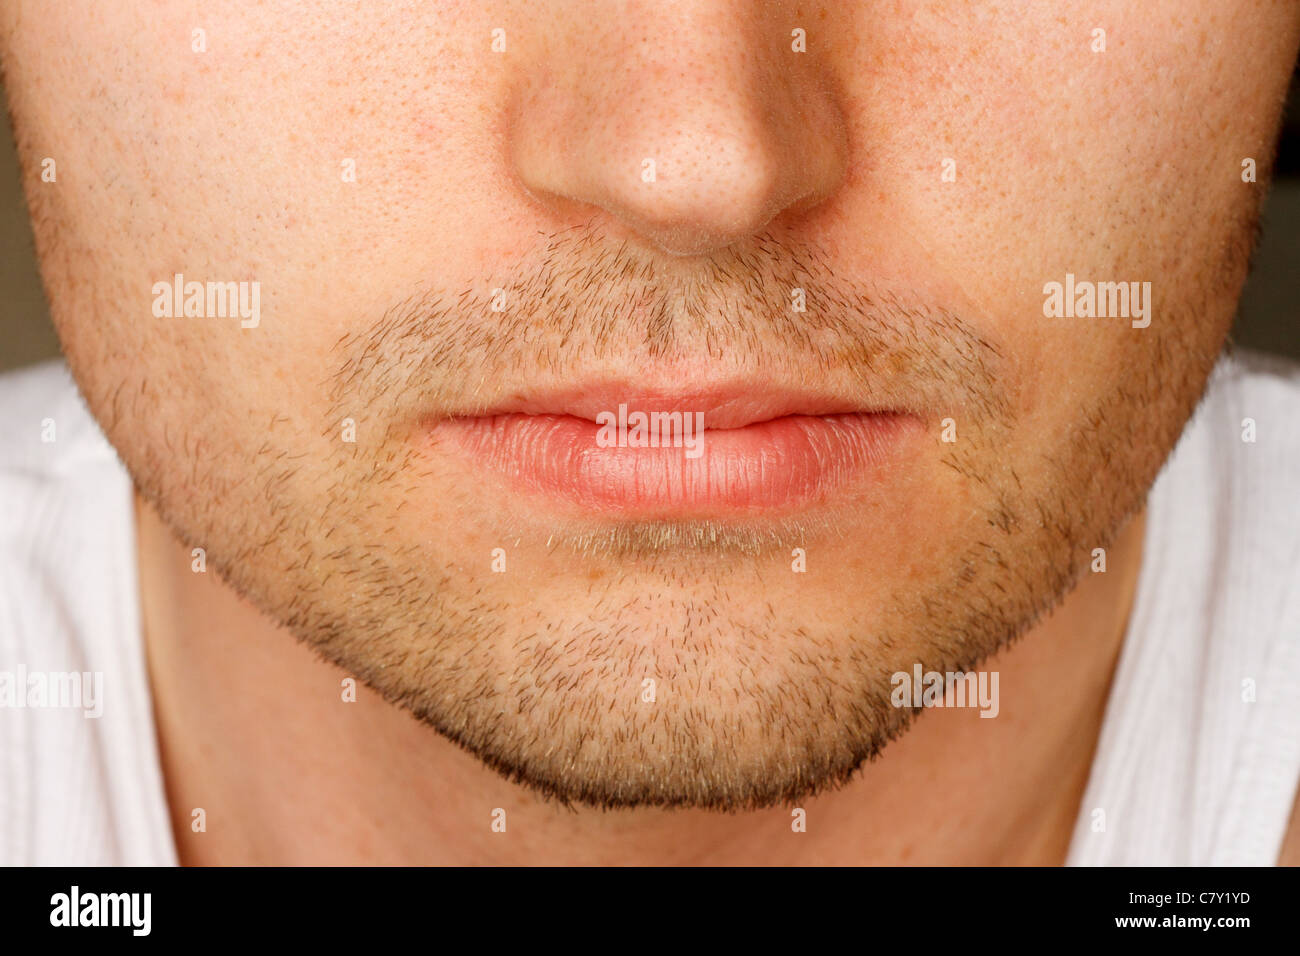 Close up of man's face sporting a 5 o'clock shadow Stock Photo